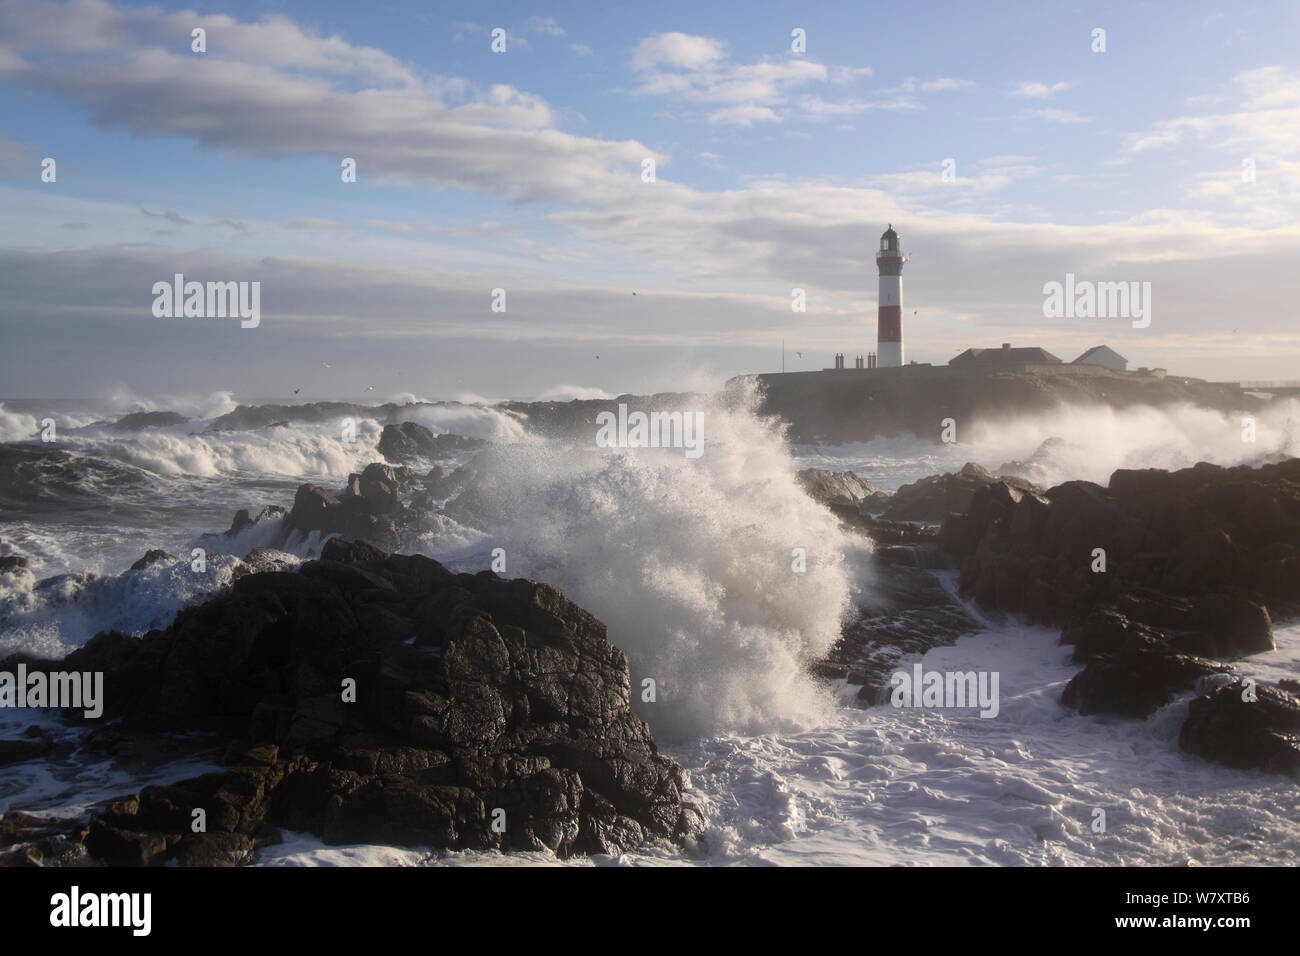 Heavy seas crashing against the coast at Buchan Ness Lighthouse, north-east Scotland, January 2014. All non-editorial uses must be cleared individually. Stock Photo